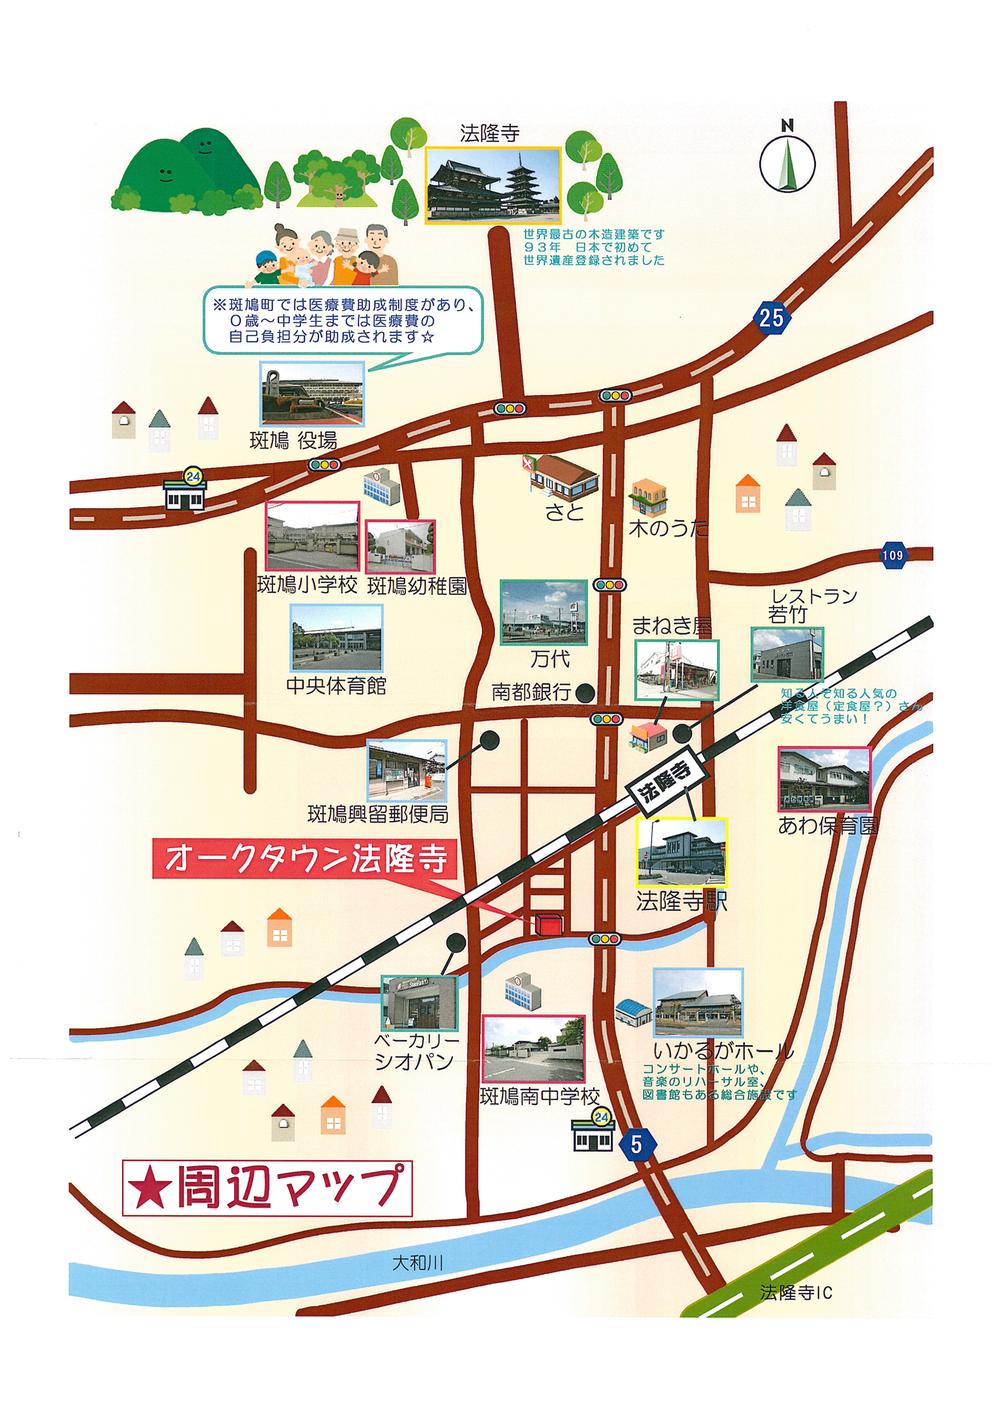 Local guide map. Peripheral map